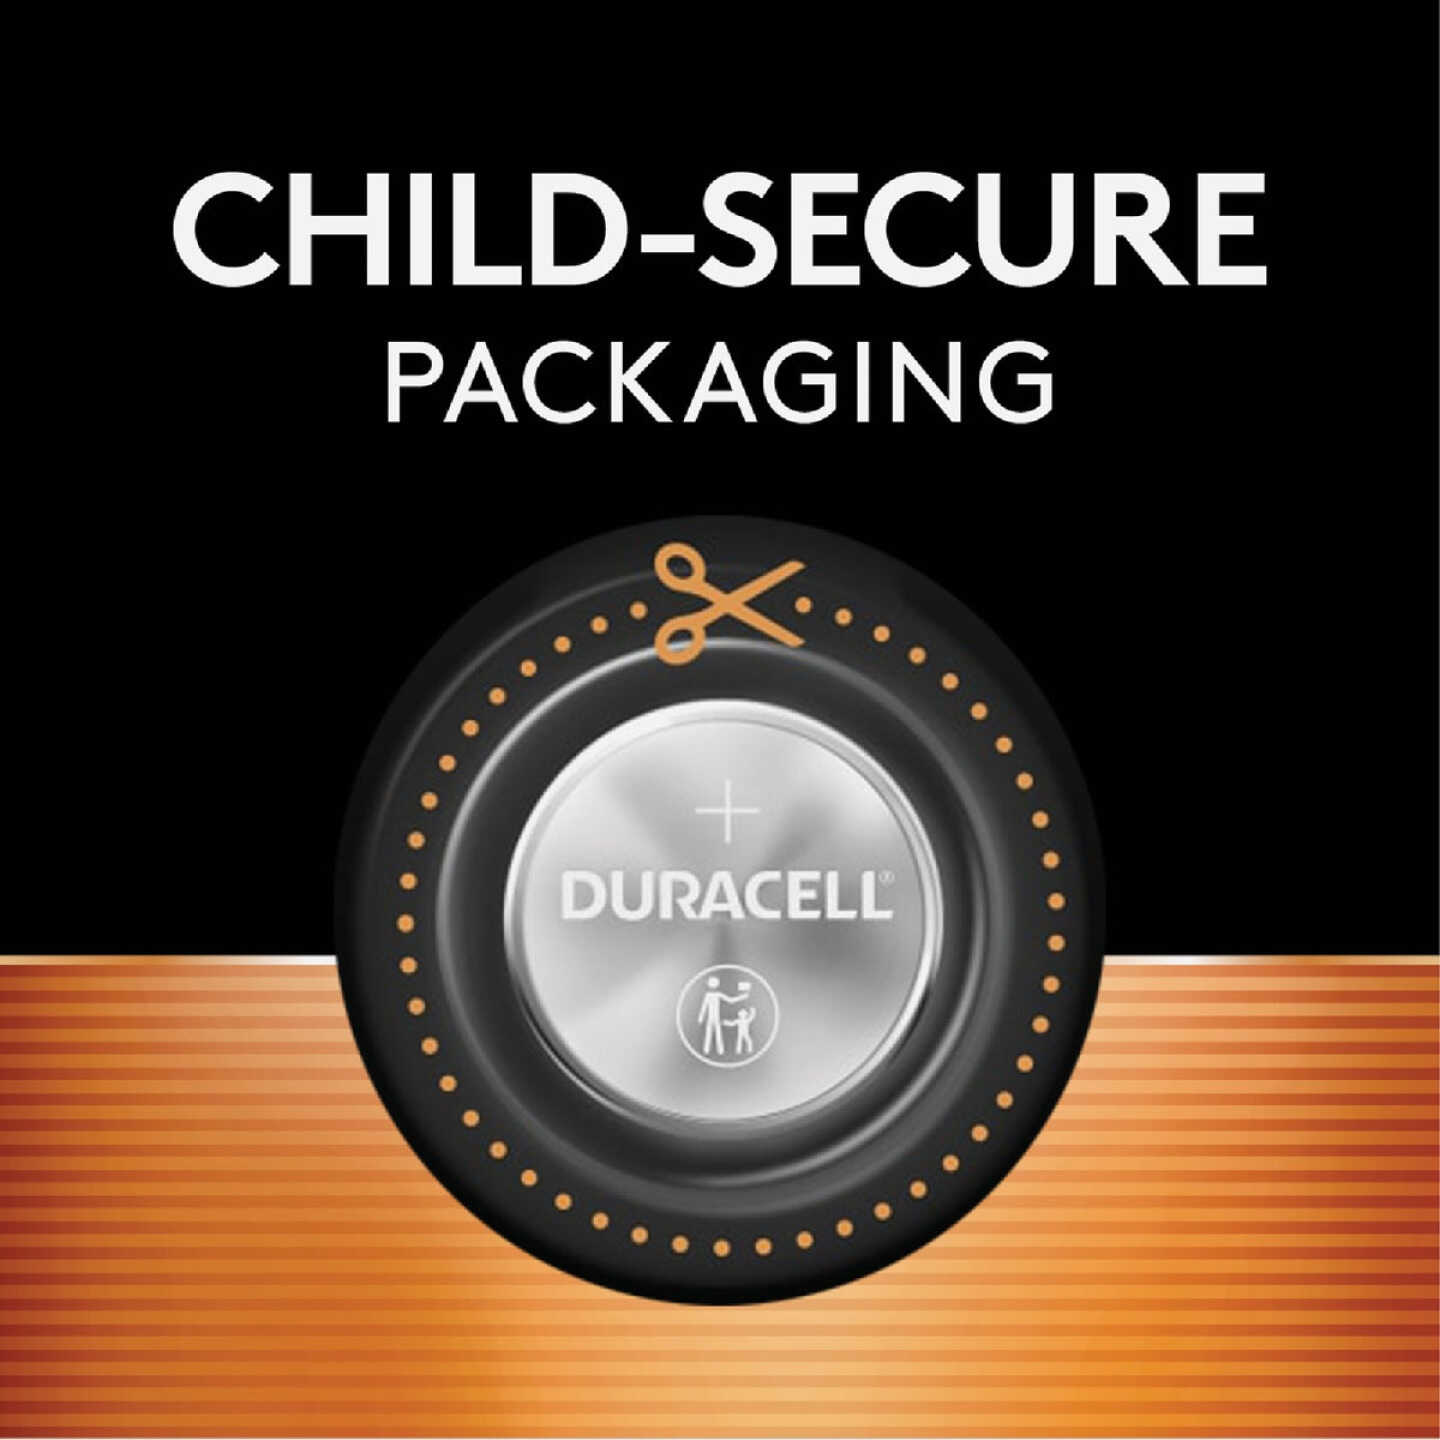 Duracell Lithium Dl 2032 Twin Pack Batteries